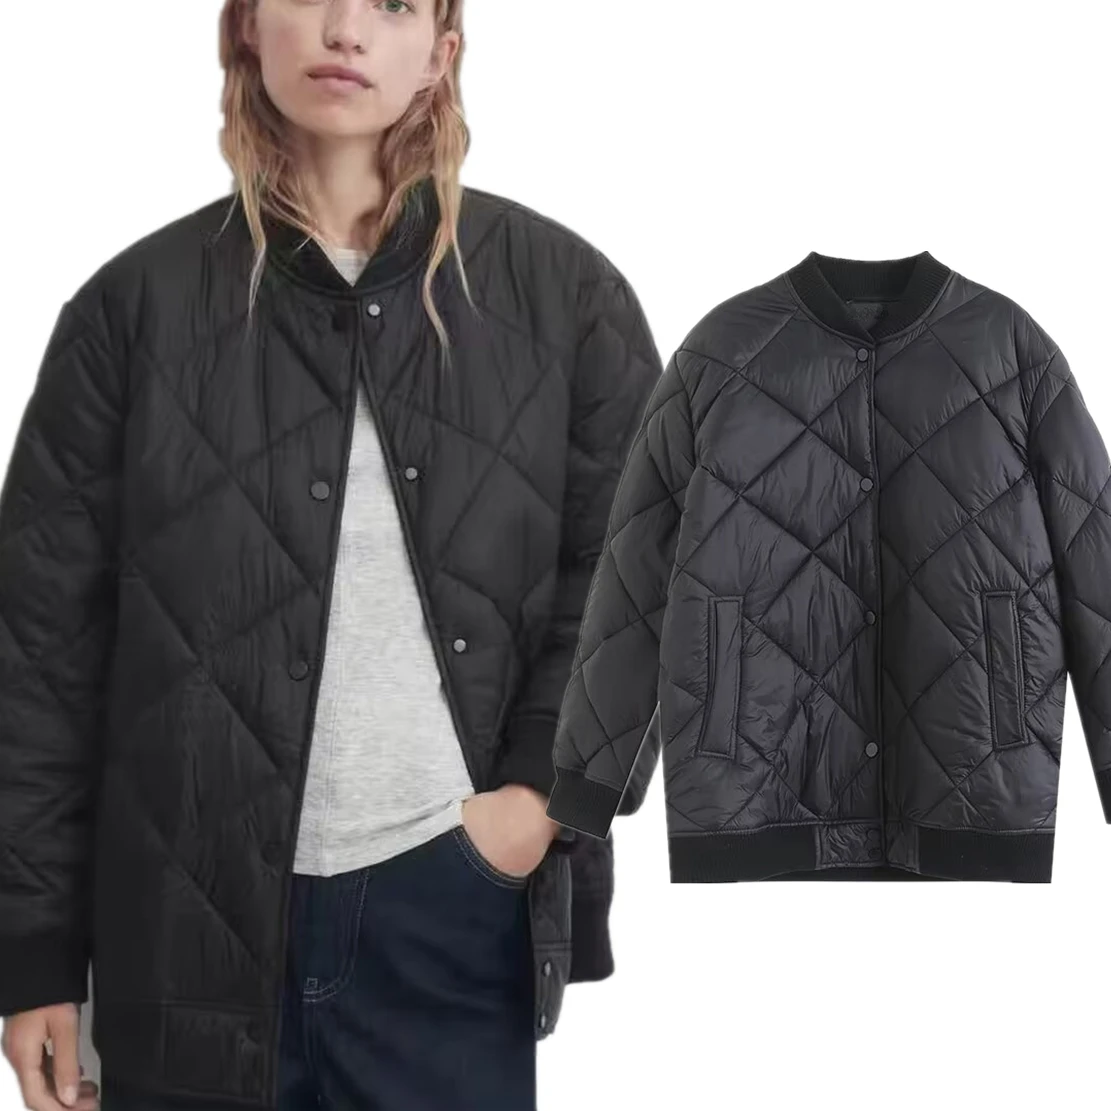 

Dave&Di Autumn And Winter Black Loose Coat Women Jacket Tops New Women's Bomber Quilted Flight Jacket